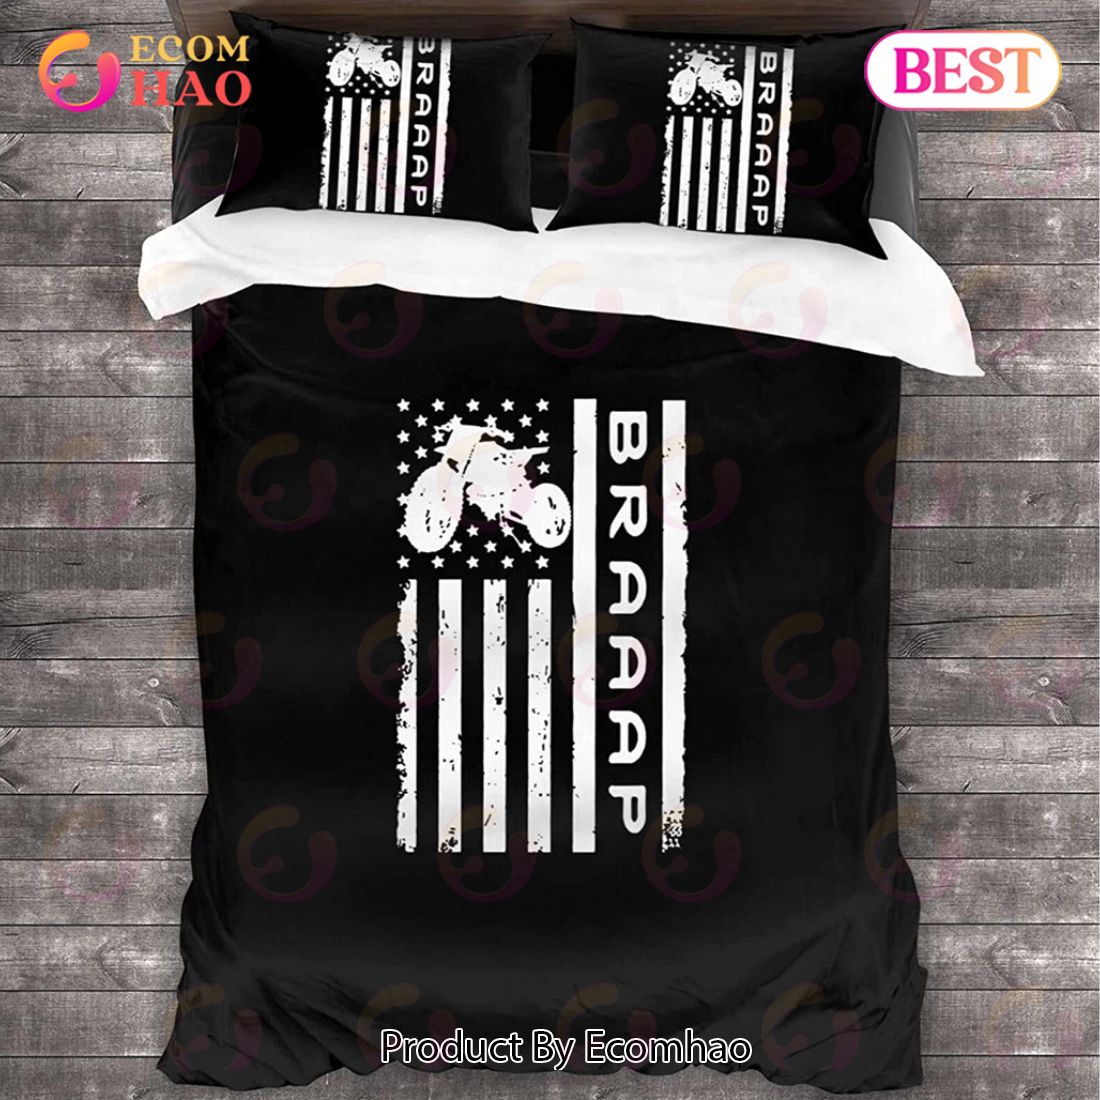 Braaap Motocross Dirt Bike American Flag Included Bedding Sets Bedclothes Bedspread Bedroom Ideas Home Decor Duvet Blankets Sheets Bed Linen Covers